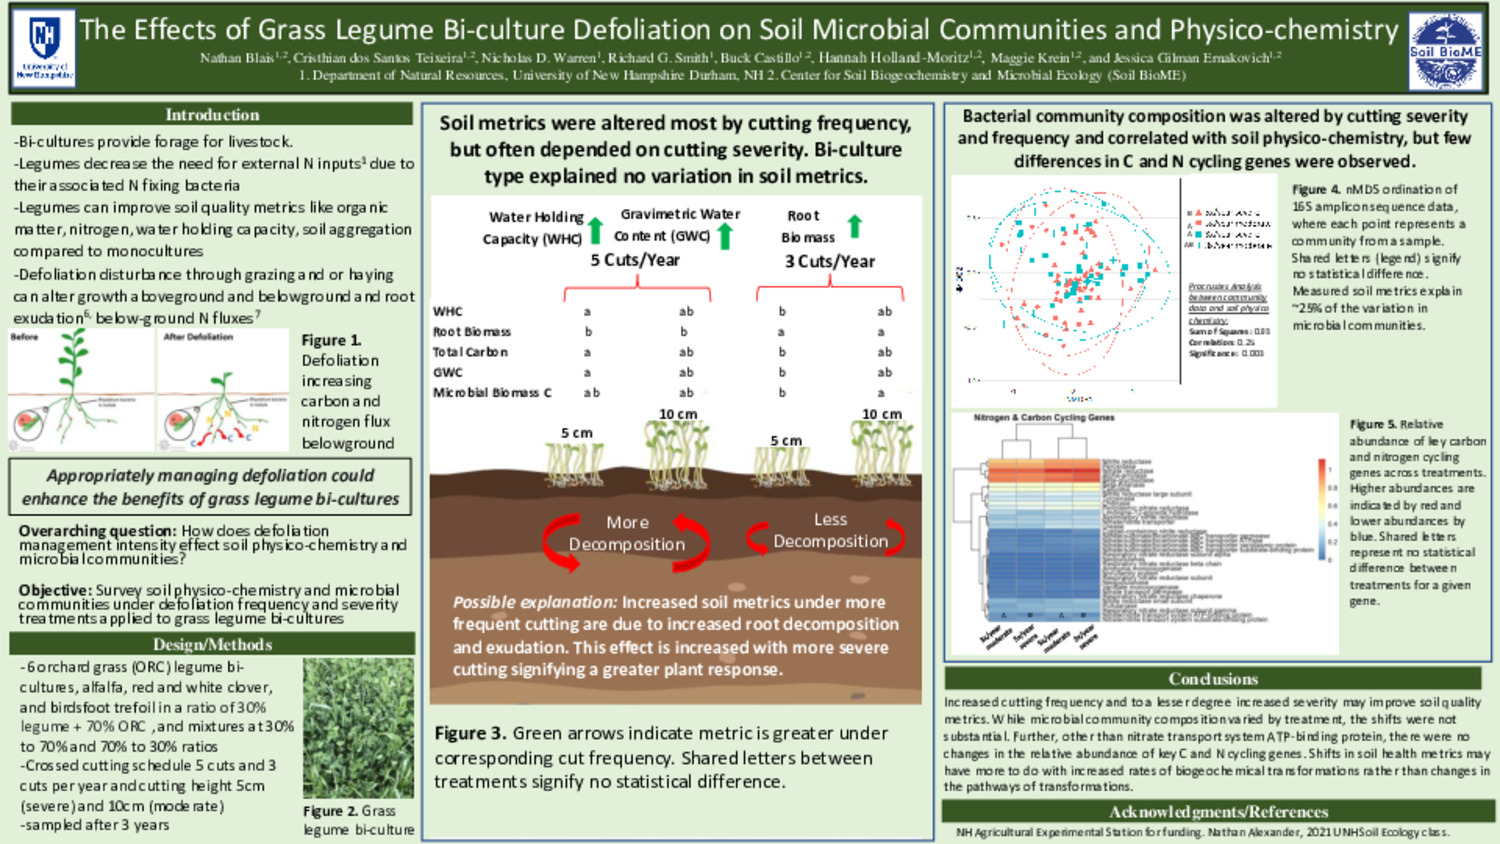 The Effects Of Grass Legume Bi-Culture Defoliation On Soil Microbial Communities And Physico-Chemistry by ndb1011